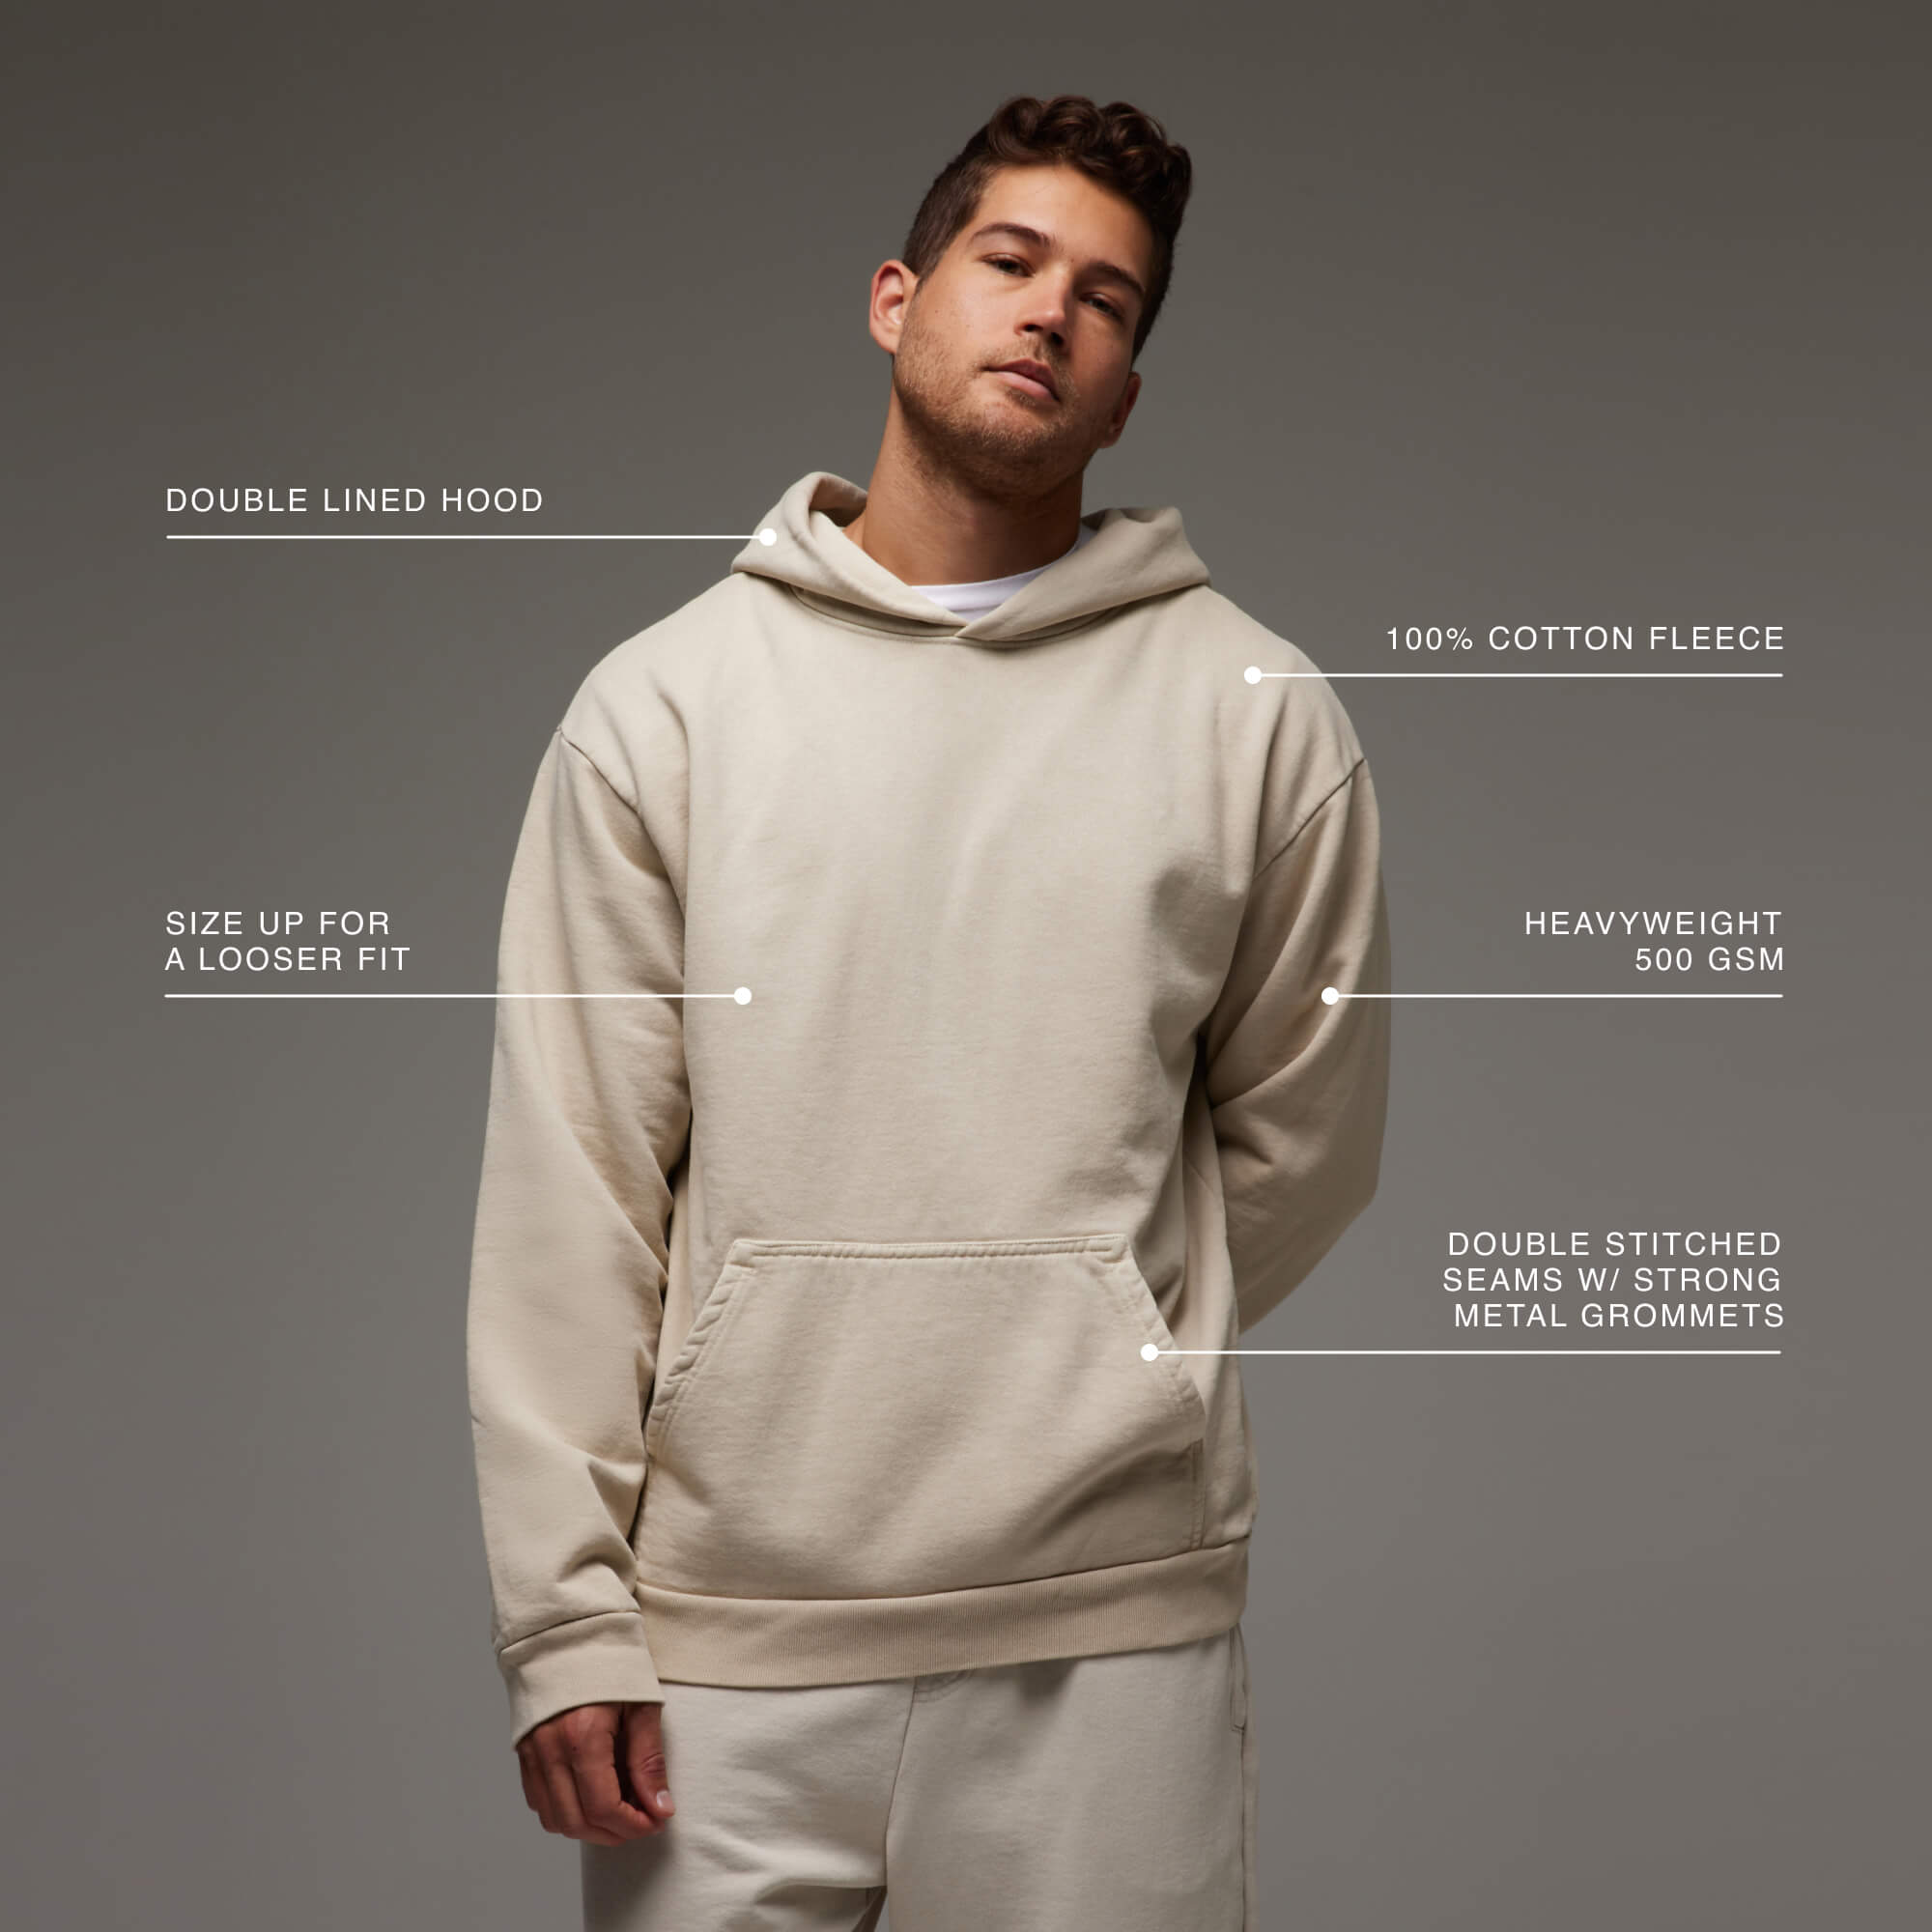 Model wearing the Mens Heavyweight Hoodie, showing the features of the high quality garment, such as: doubled stitched seams, doubled lined hood and heavyweight 500 GCM fabric.